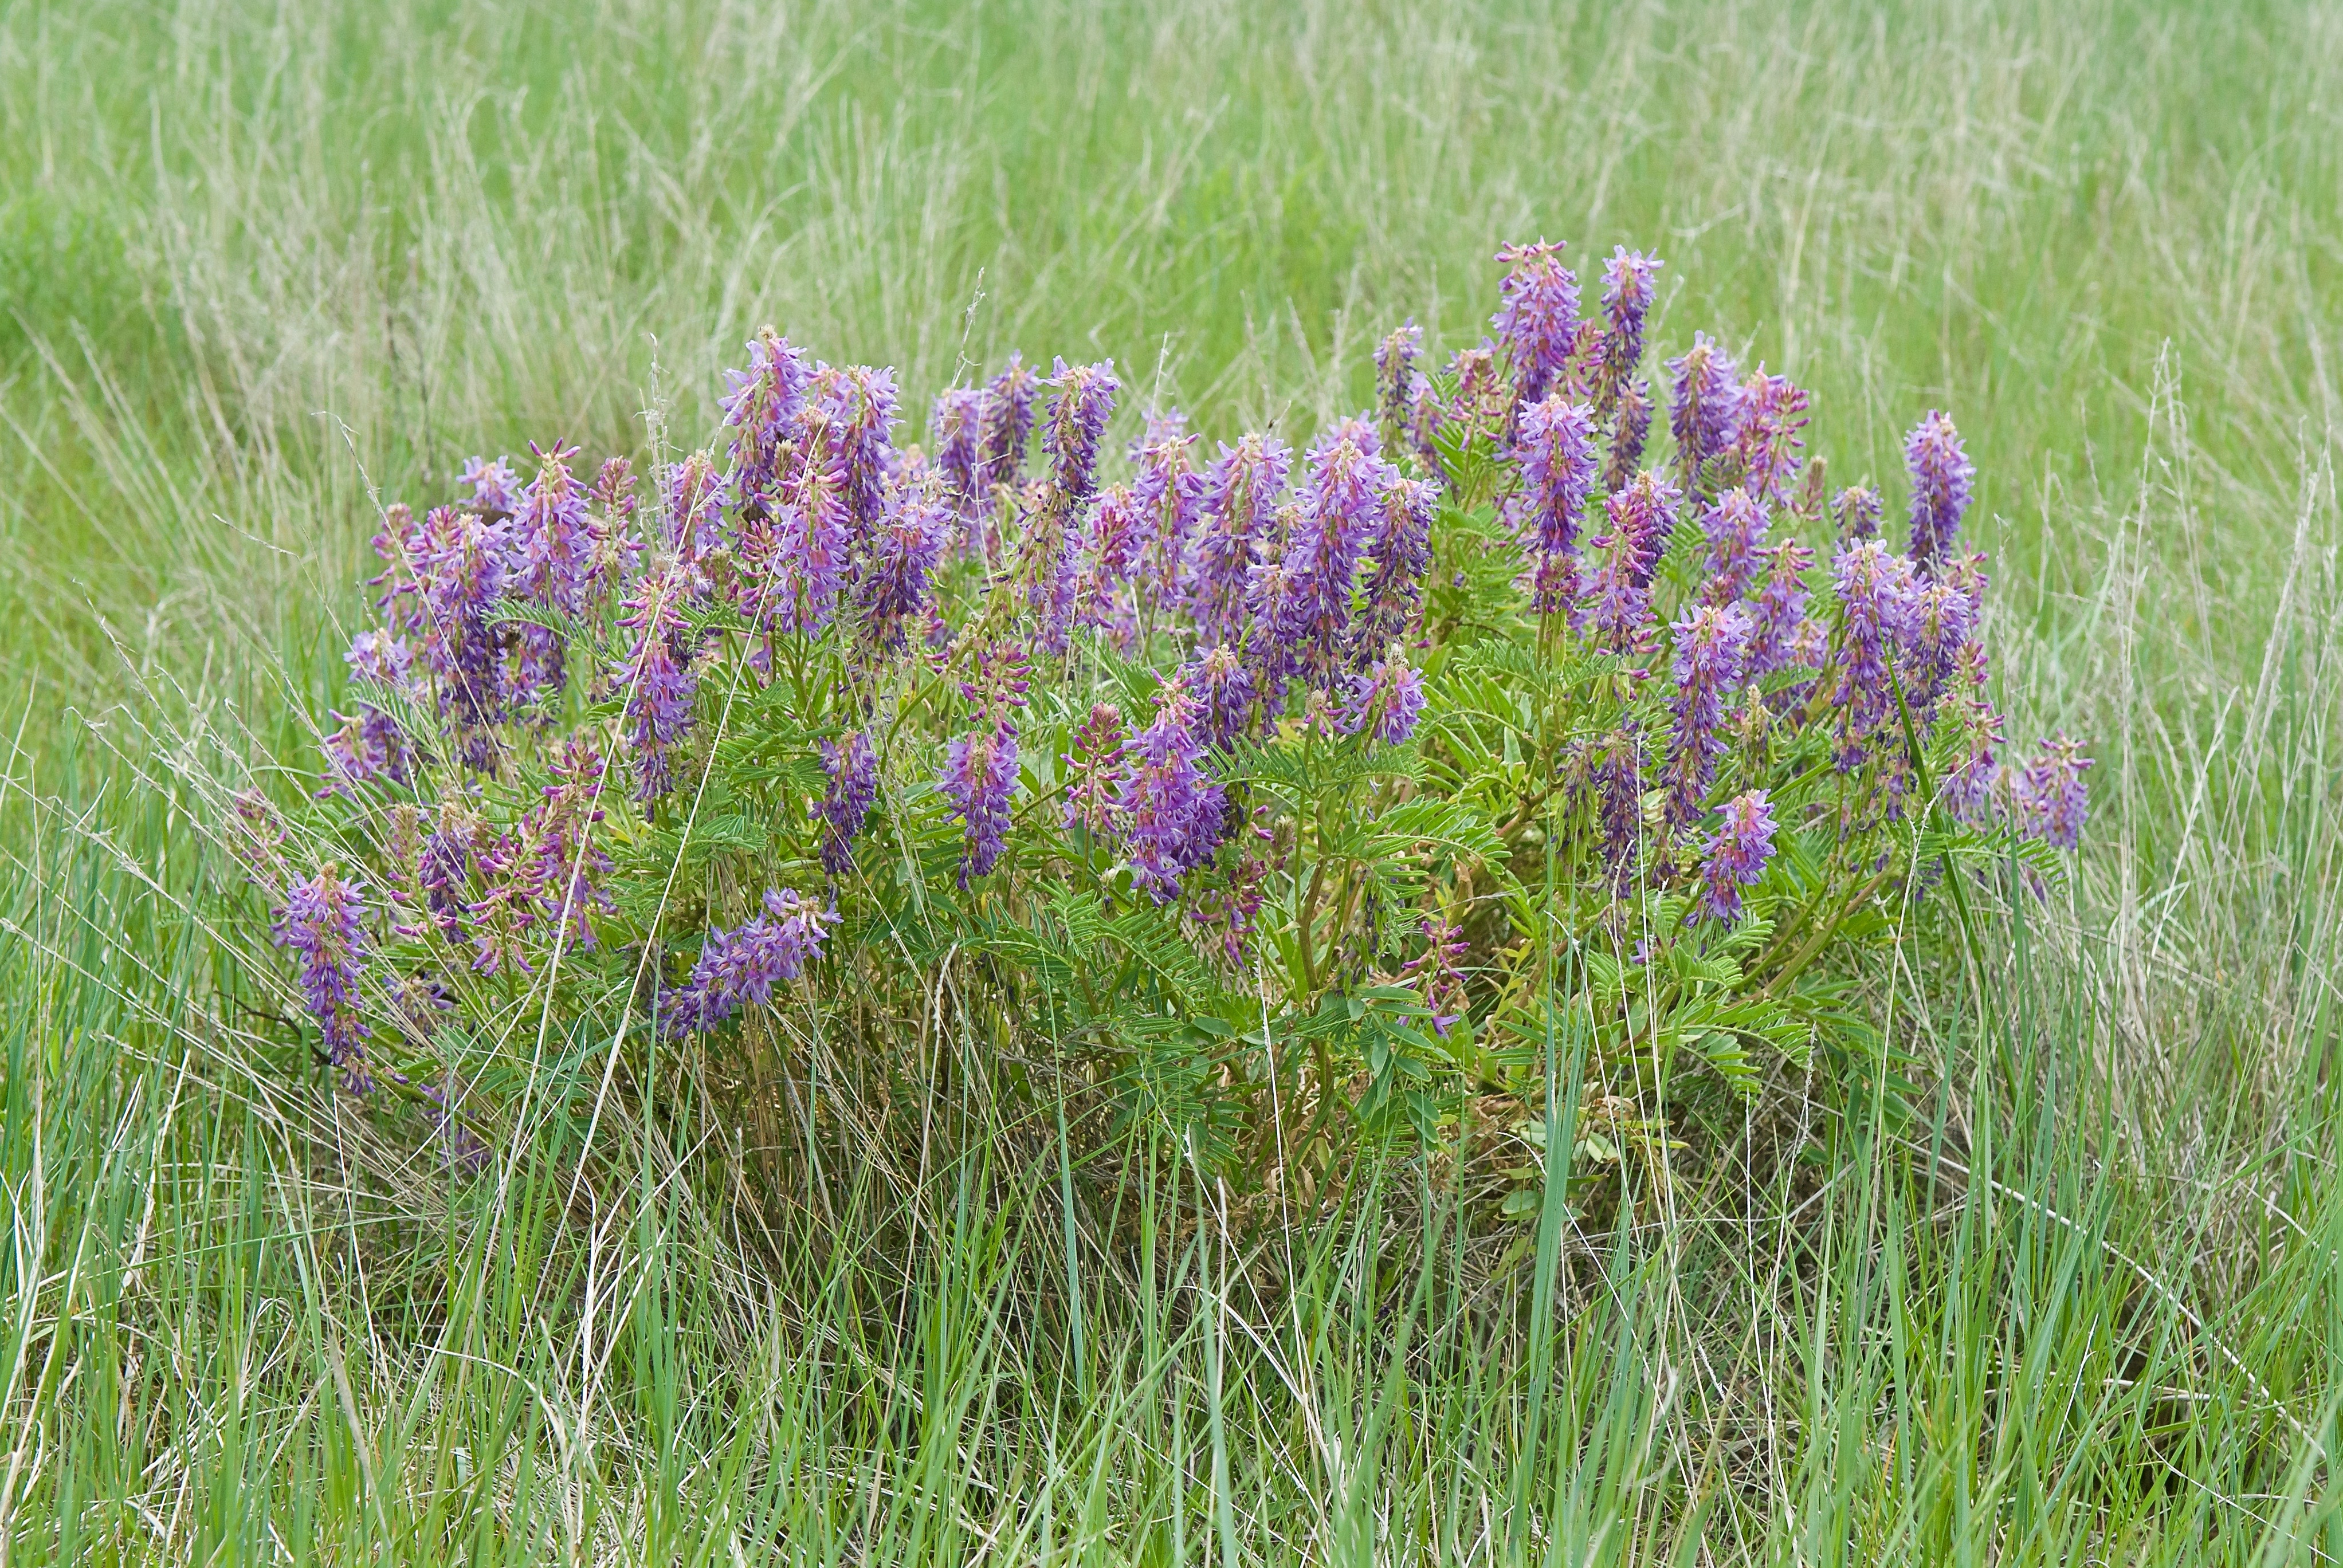 Two-Grooved Milkvetch (Astragalus bisulcatus)